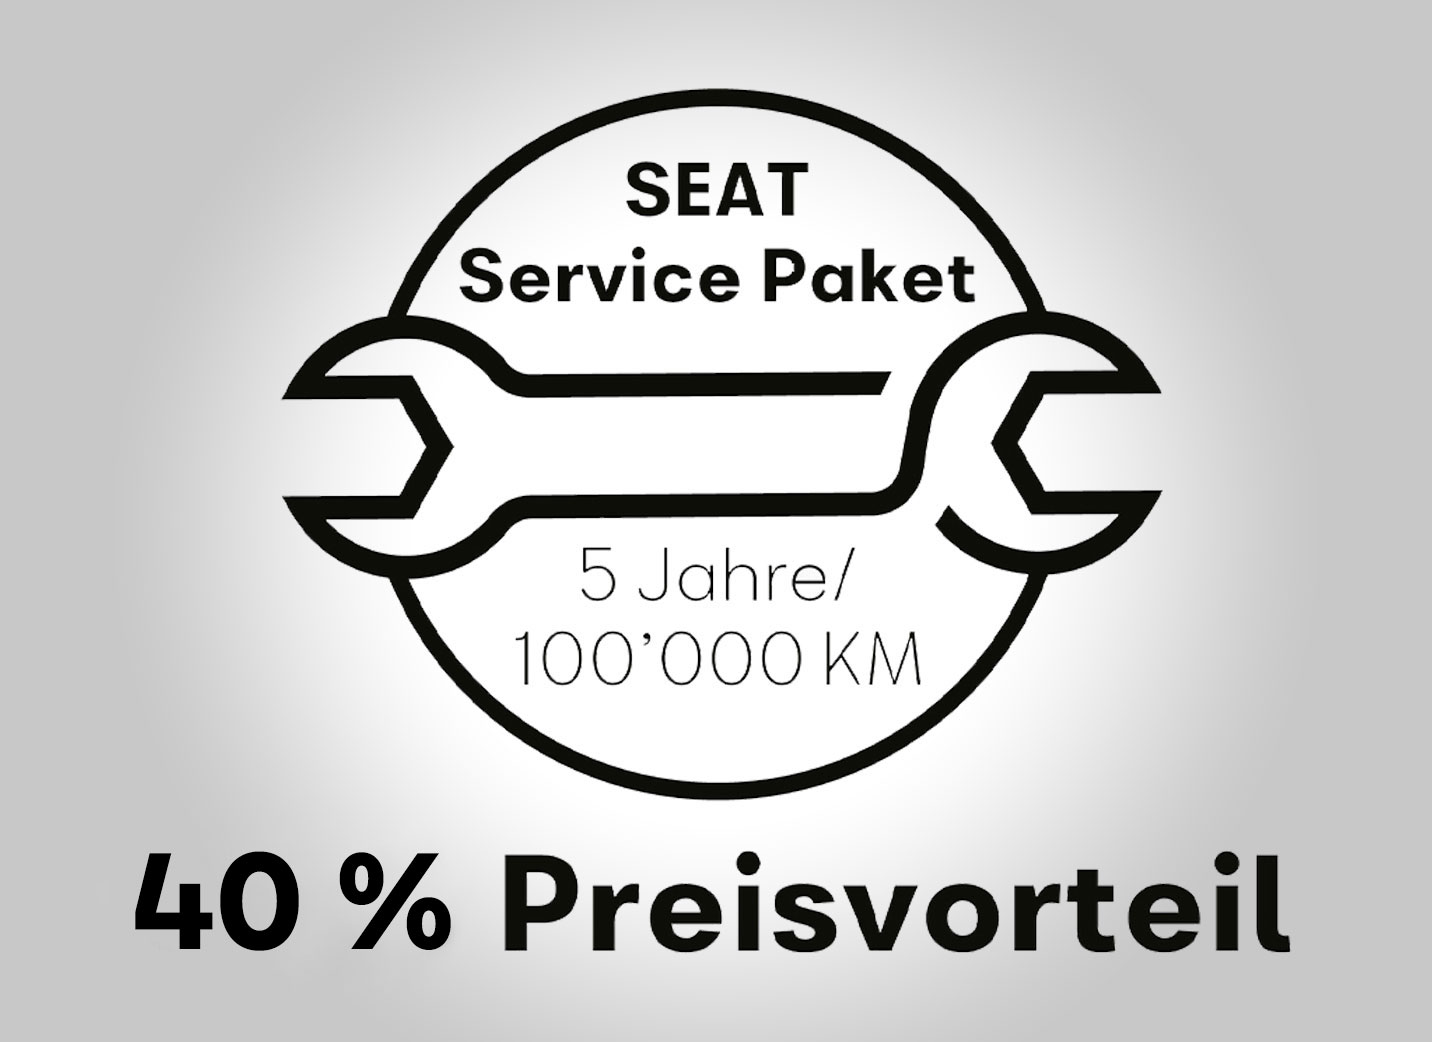 SEAT Services